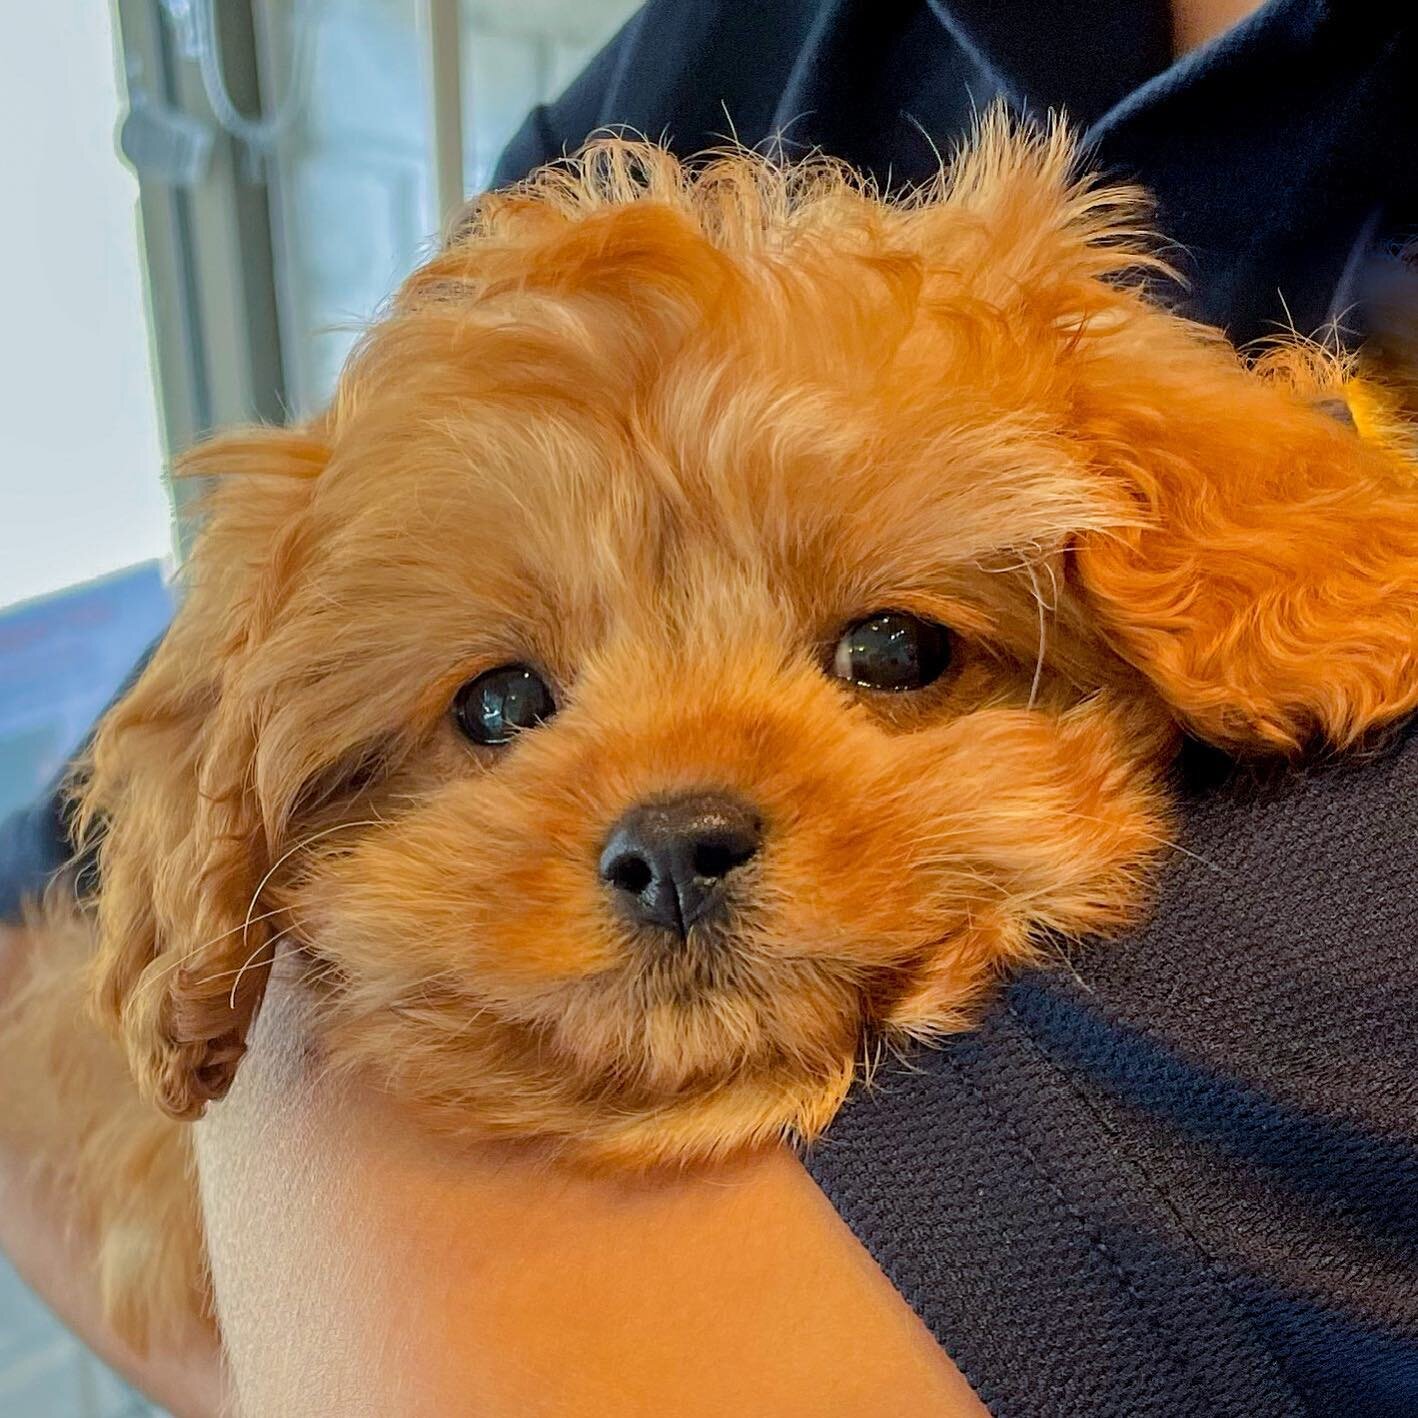 We all fell in love with little Louie the 12wk old Cavoodle, and we mean it when we say little... he only weighed a teeny tiny 1.05kgs! 💛 @louiethecavoodlee